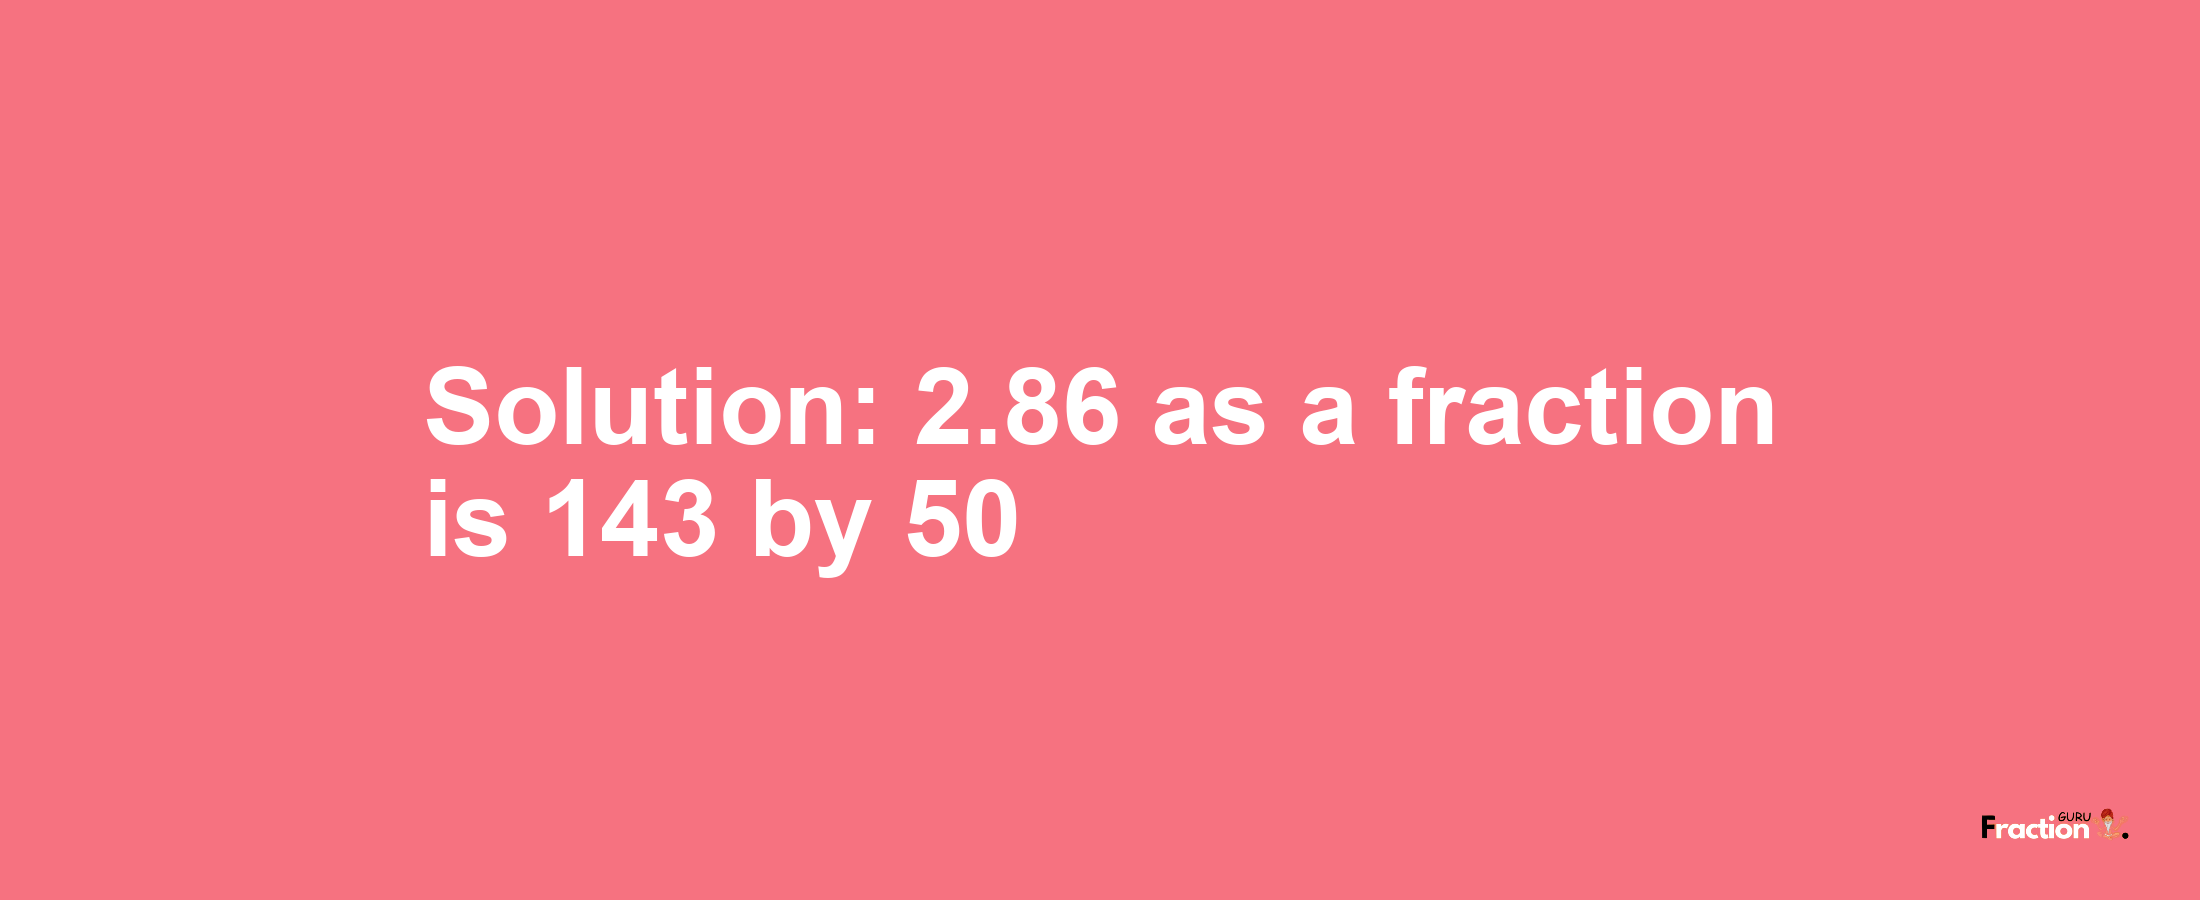 Solution:2.86 as a fraction is 143/50